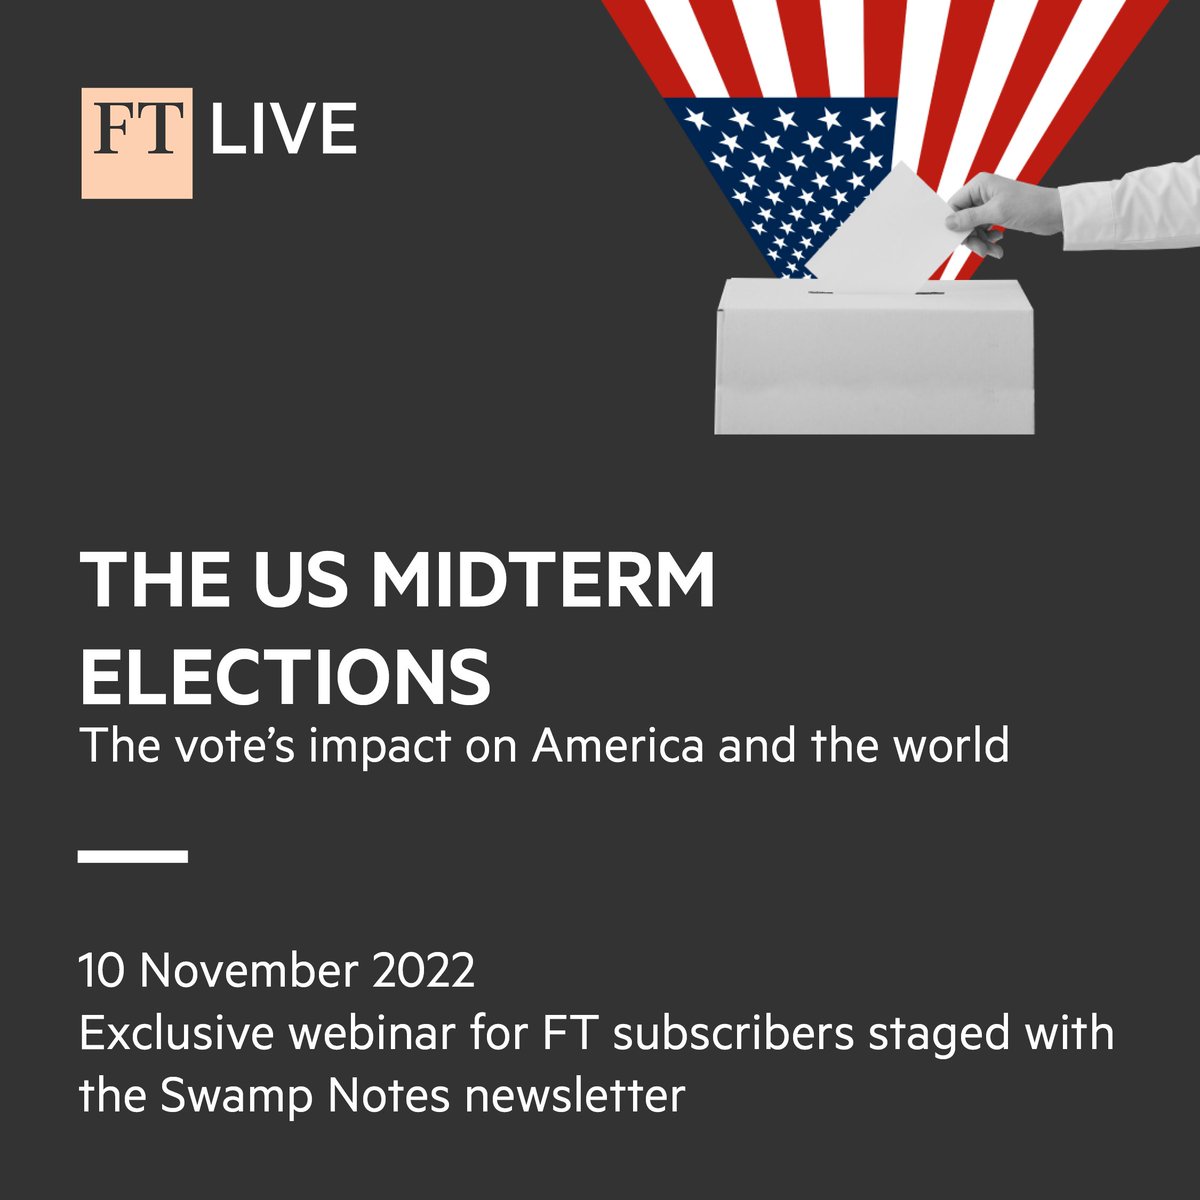 Delighted to join my friend @EdwardGLuce and other luminaries to analyze election results on Nov 10 usmidtermelections.live.ft.com/home?reference…